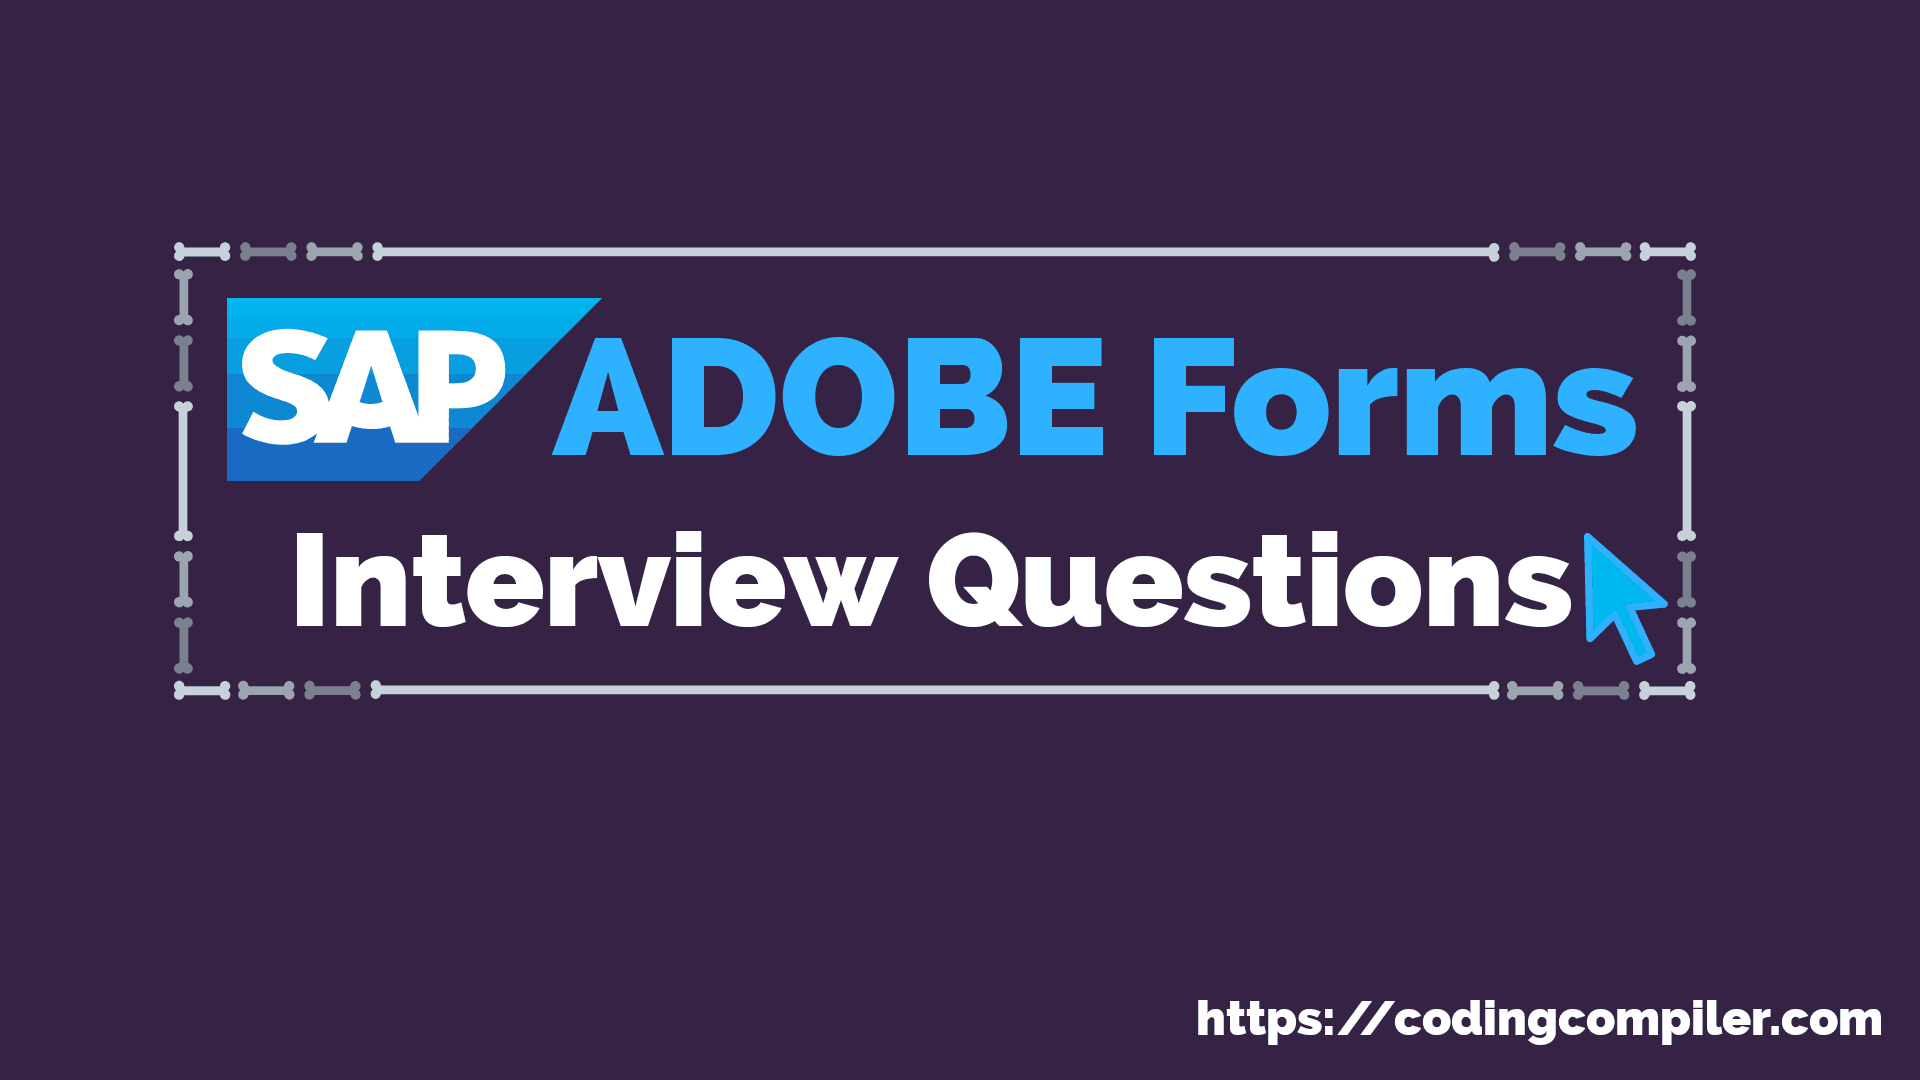 SAP Adobe Forms Interview Questions